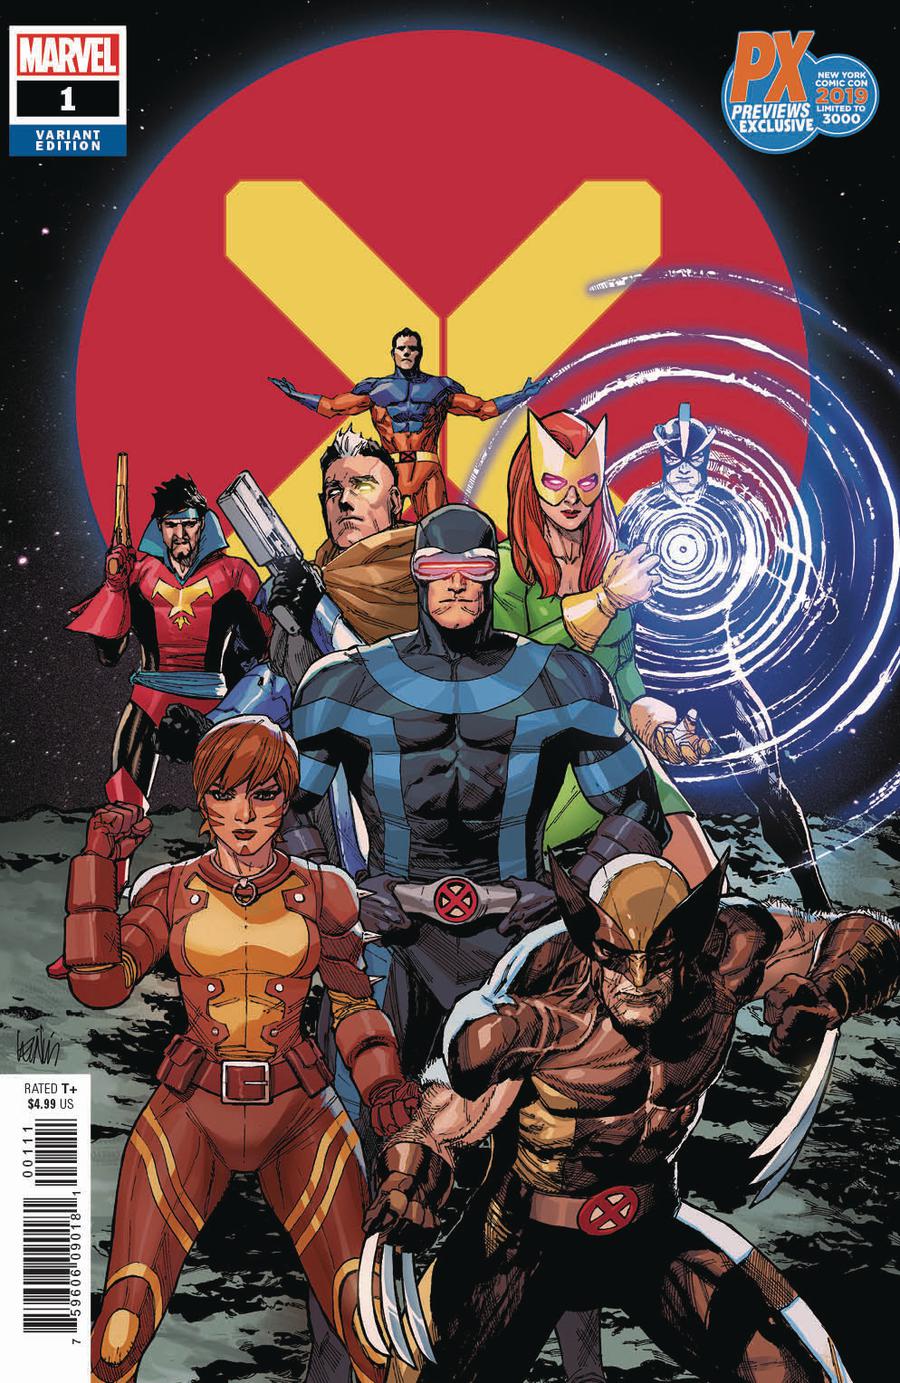 X-Men Vol 5 #1 Cover M NYCC 2019 Exclusive Leinil Francis Yu Variant Cover (Dawn Of X Tie-In)